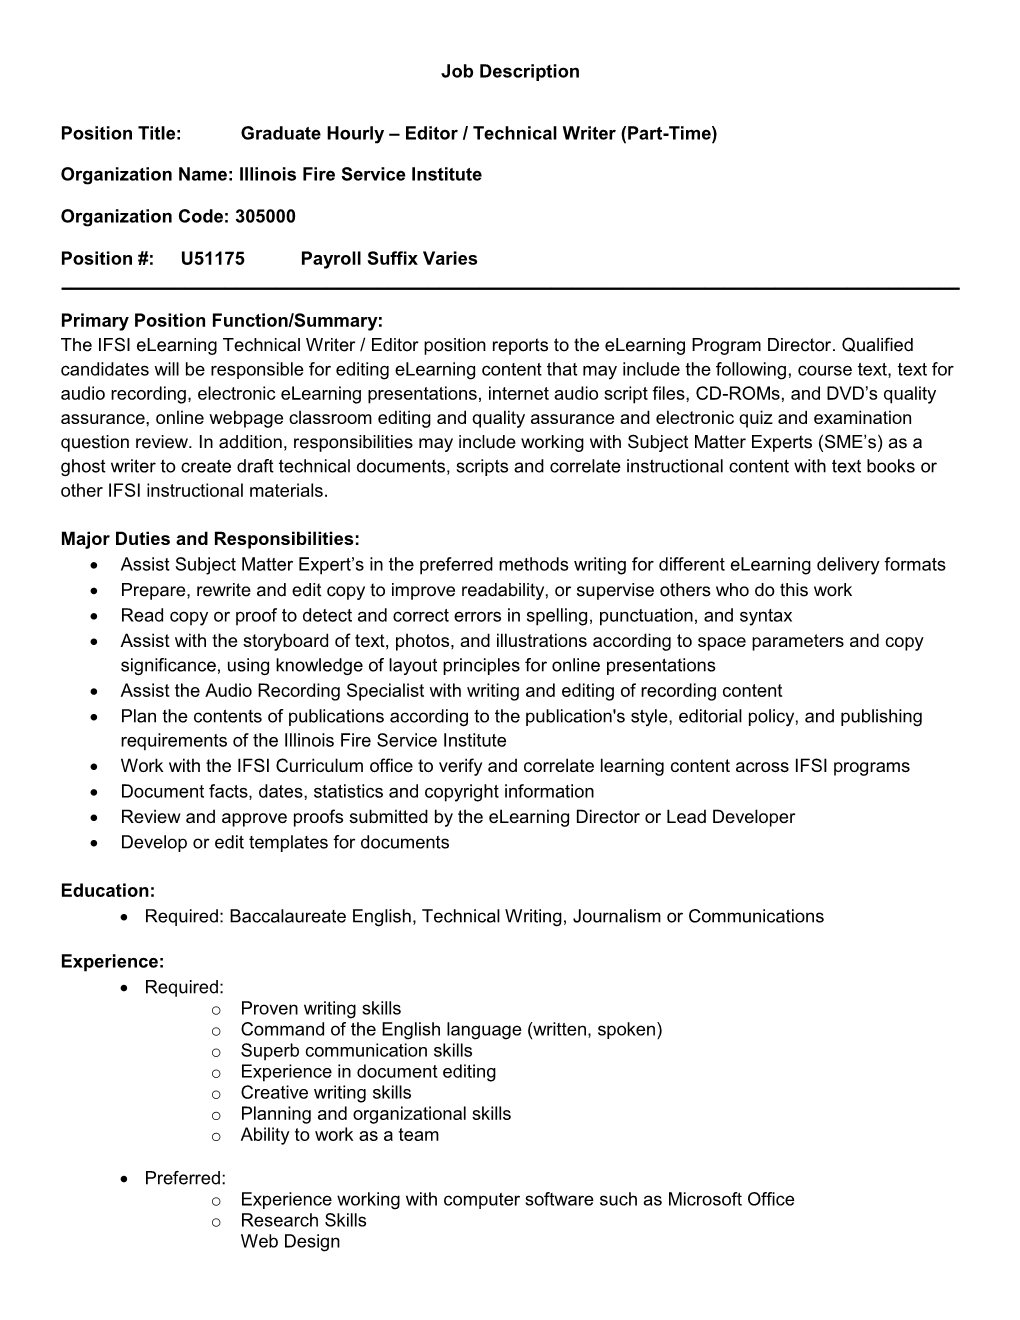 Editor / Technical Writer (Part-Time)